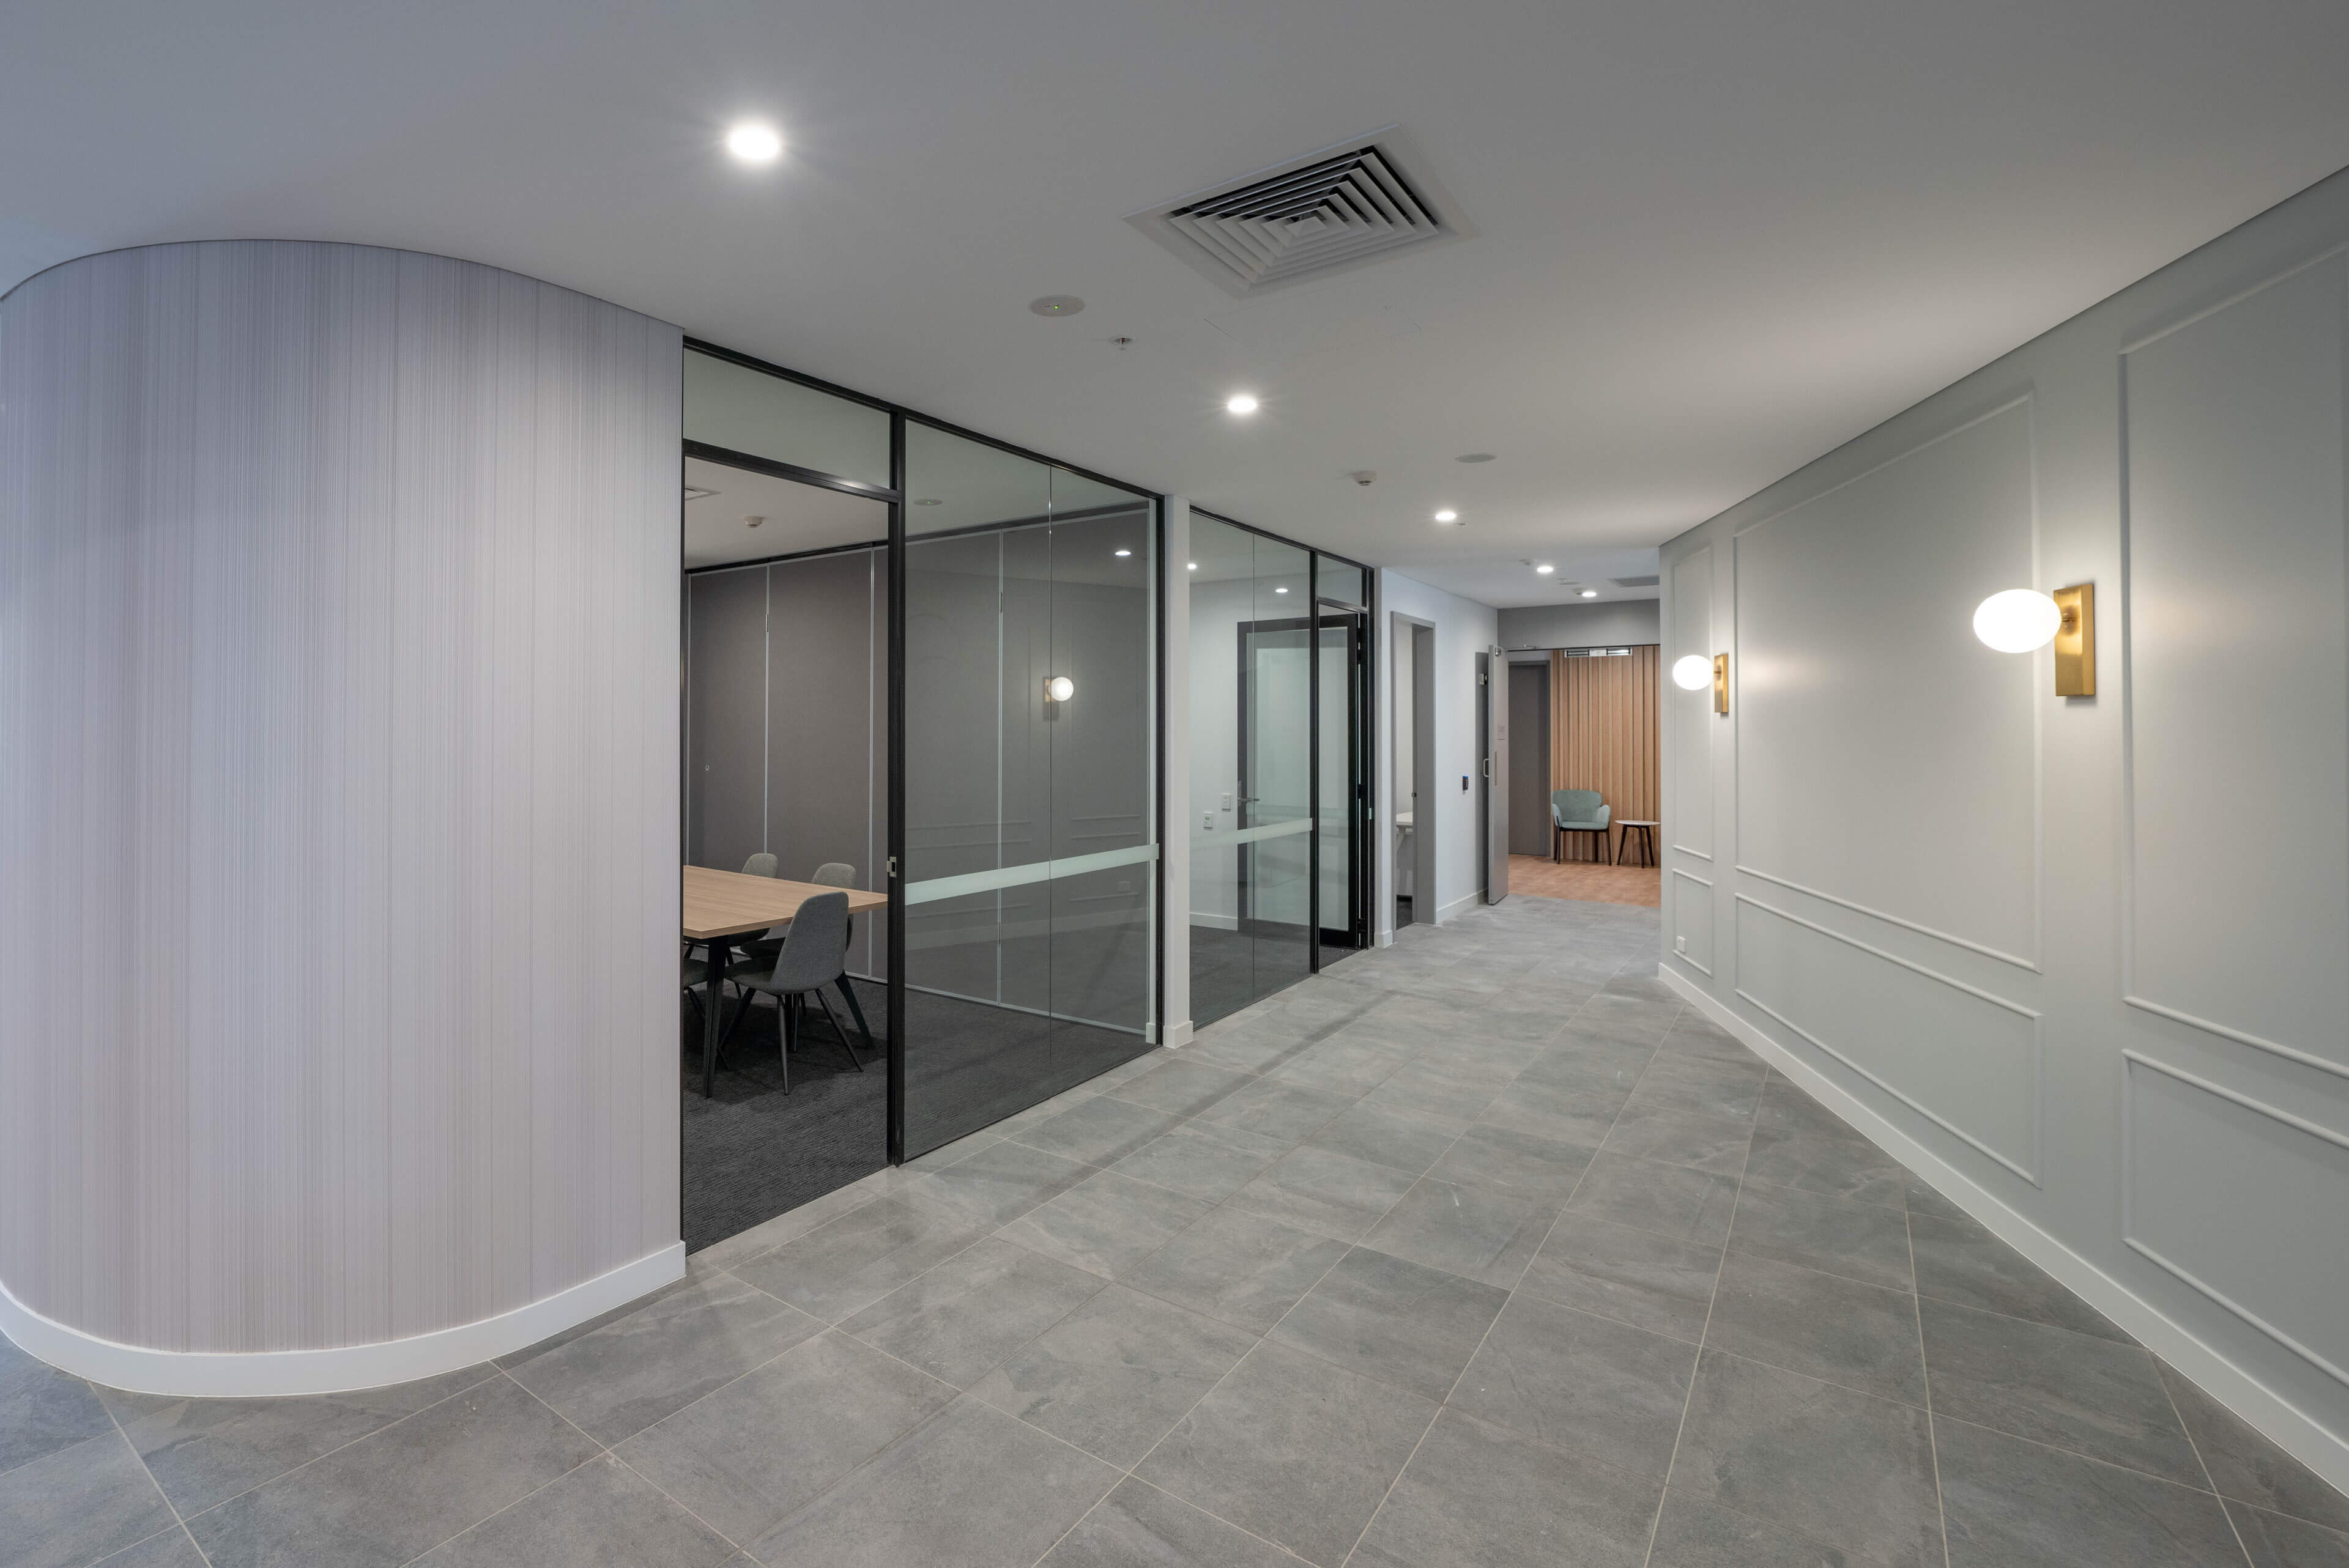 13 staff administration facilities at uniting mayflower westmead taylor construction aged care